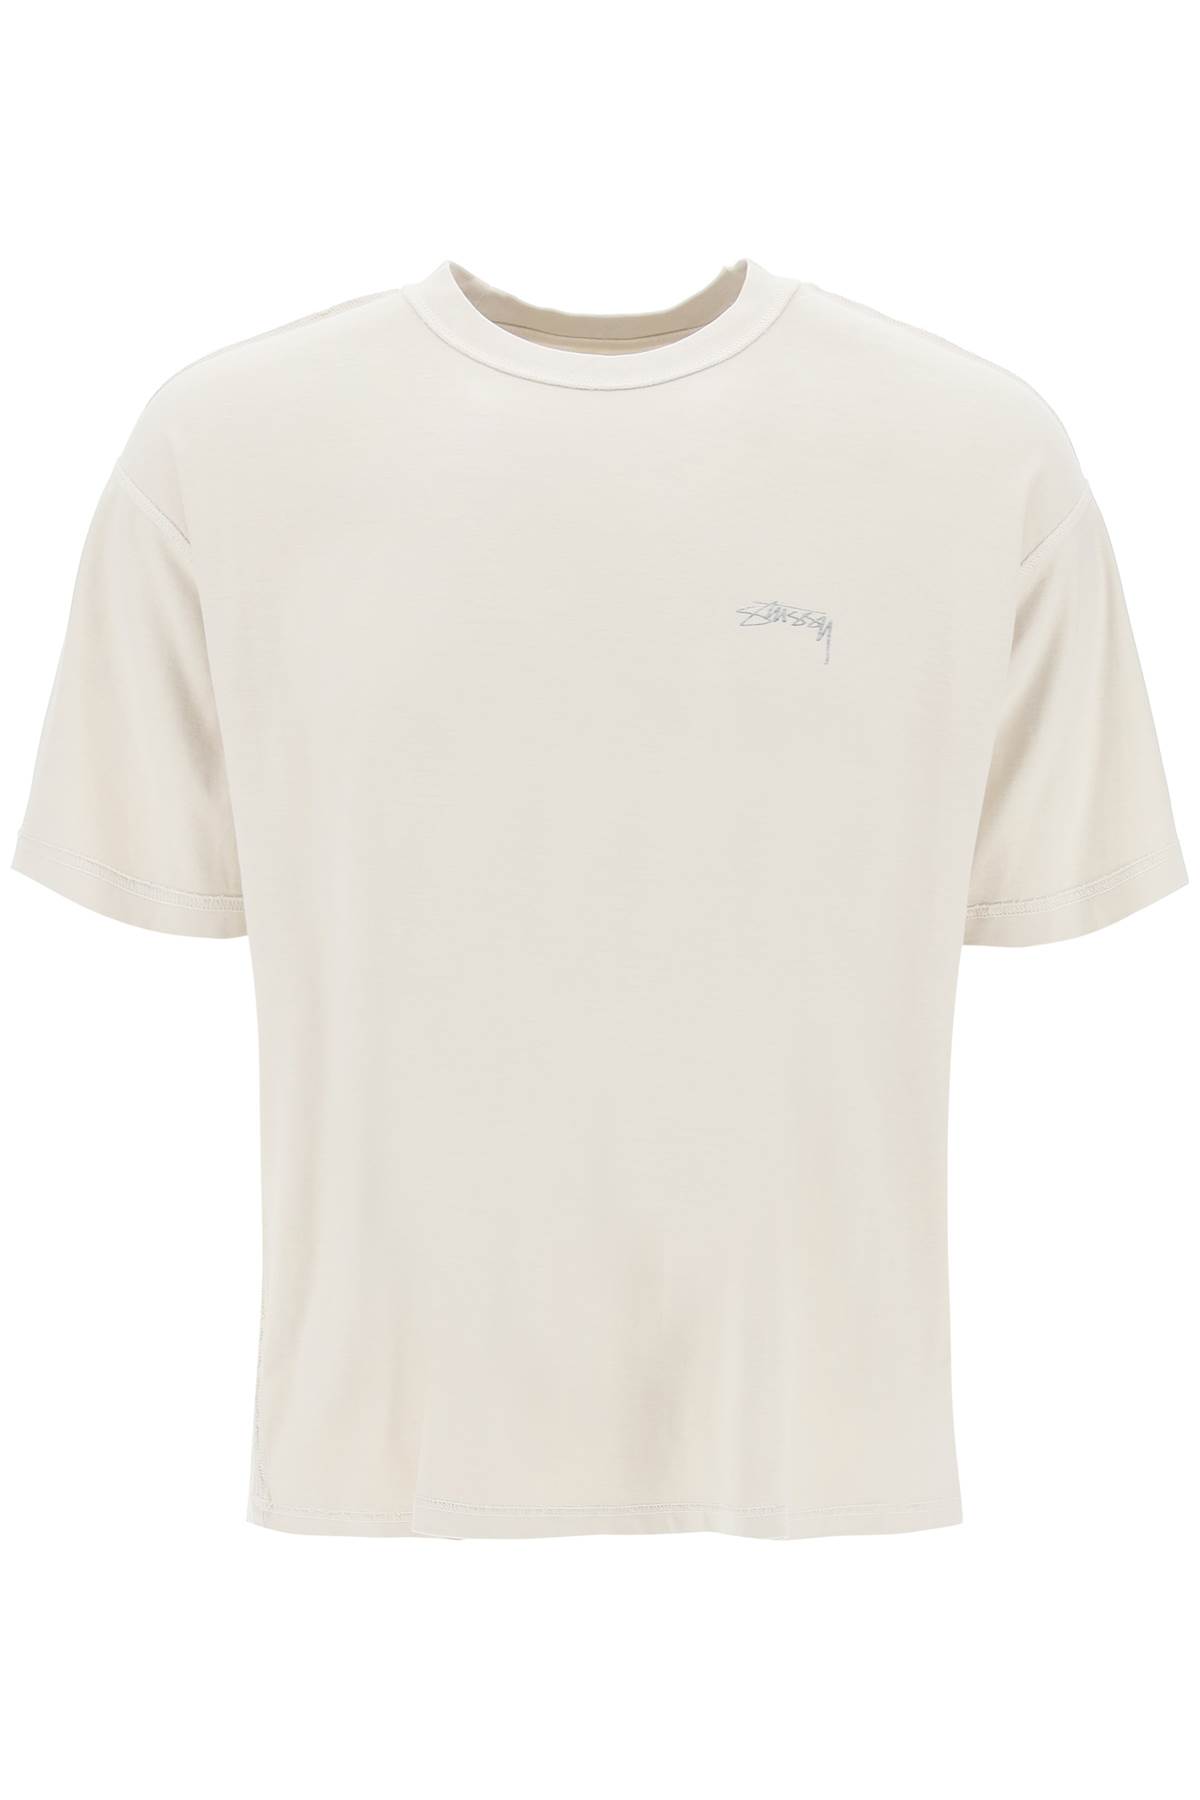 STUSSY INSIDE-OUT CREW-NECK T-SHIRT